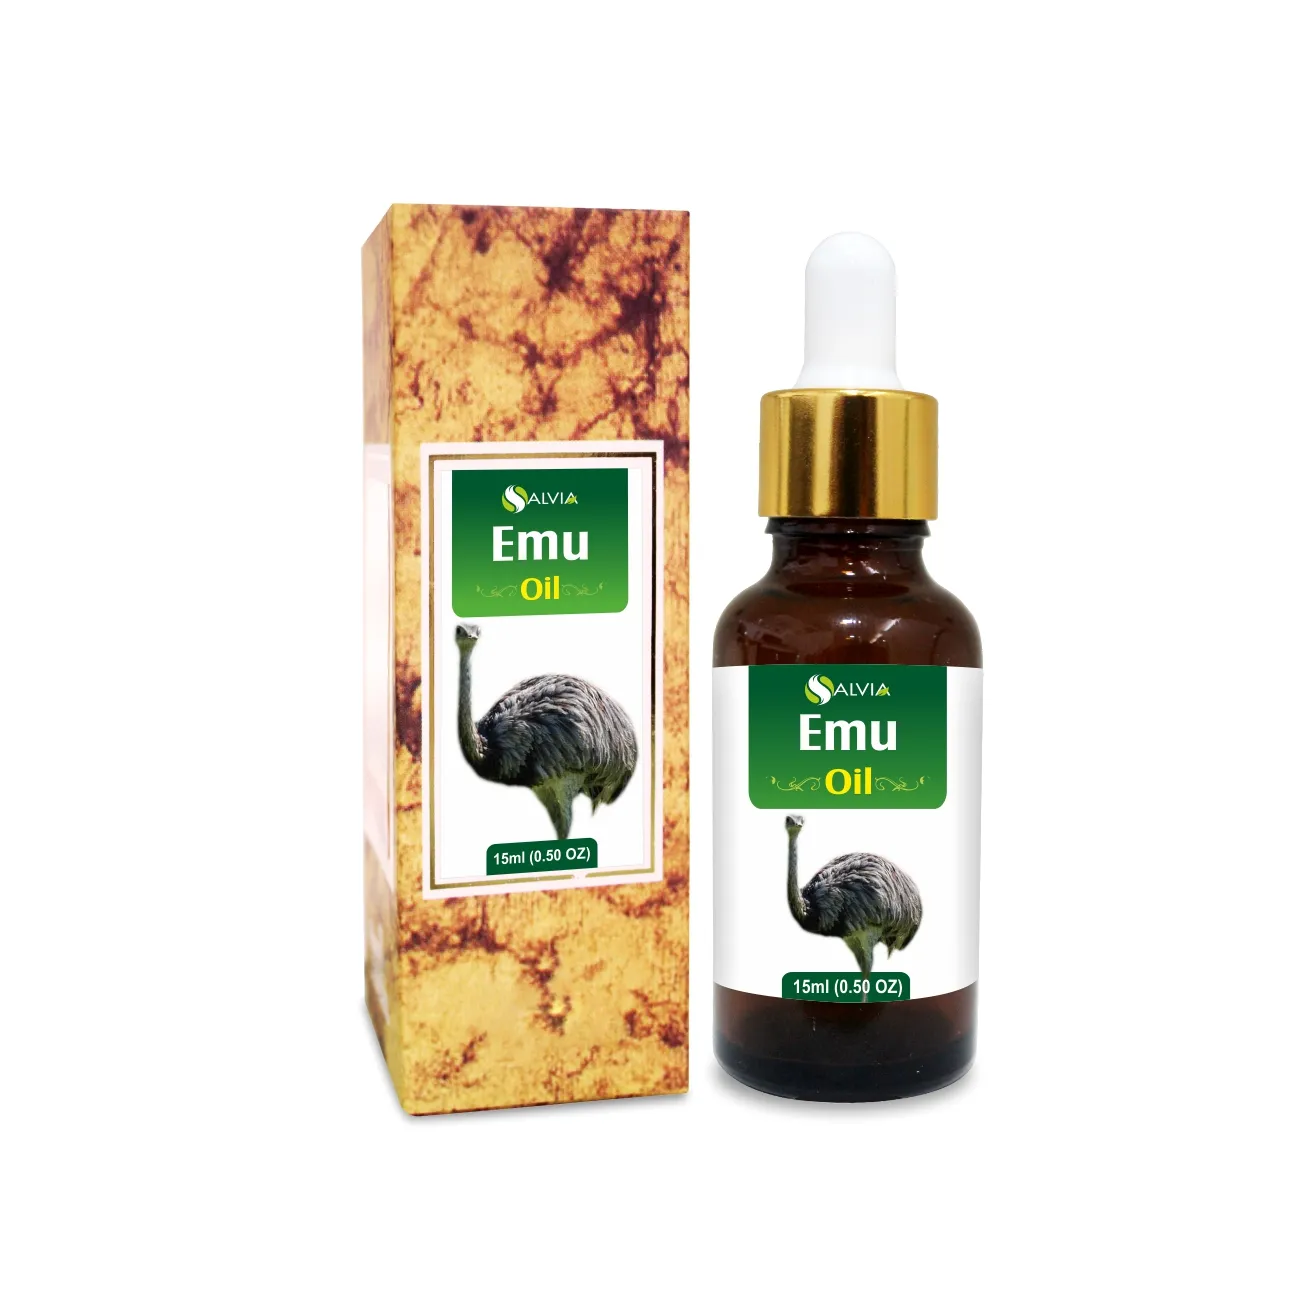 Salvia Emu Oil 100% Pure And Natural Lowest Price Customized Packaging Available